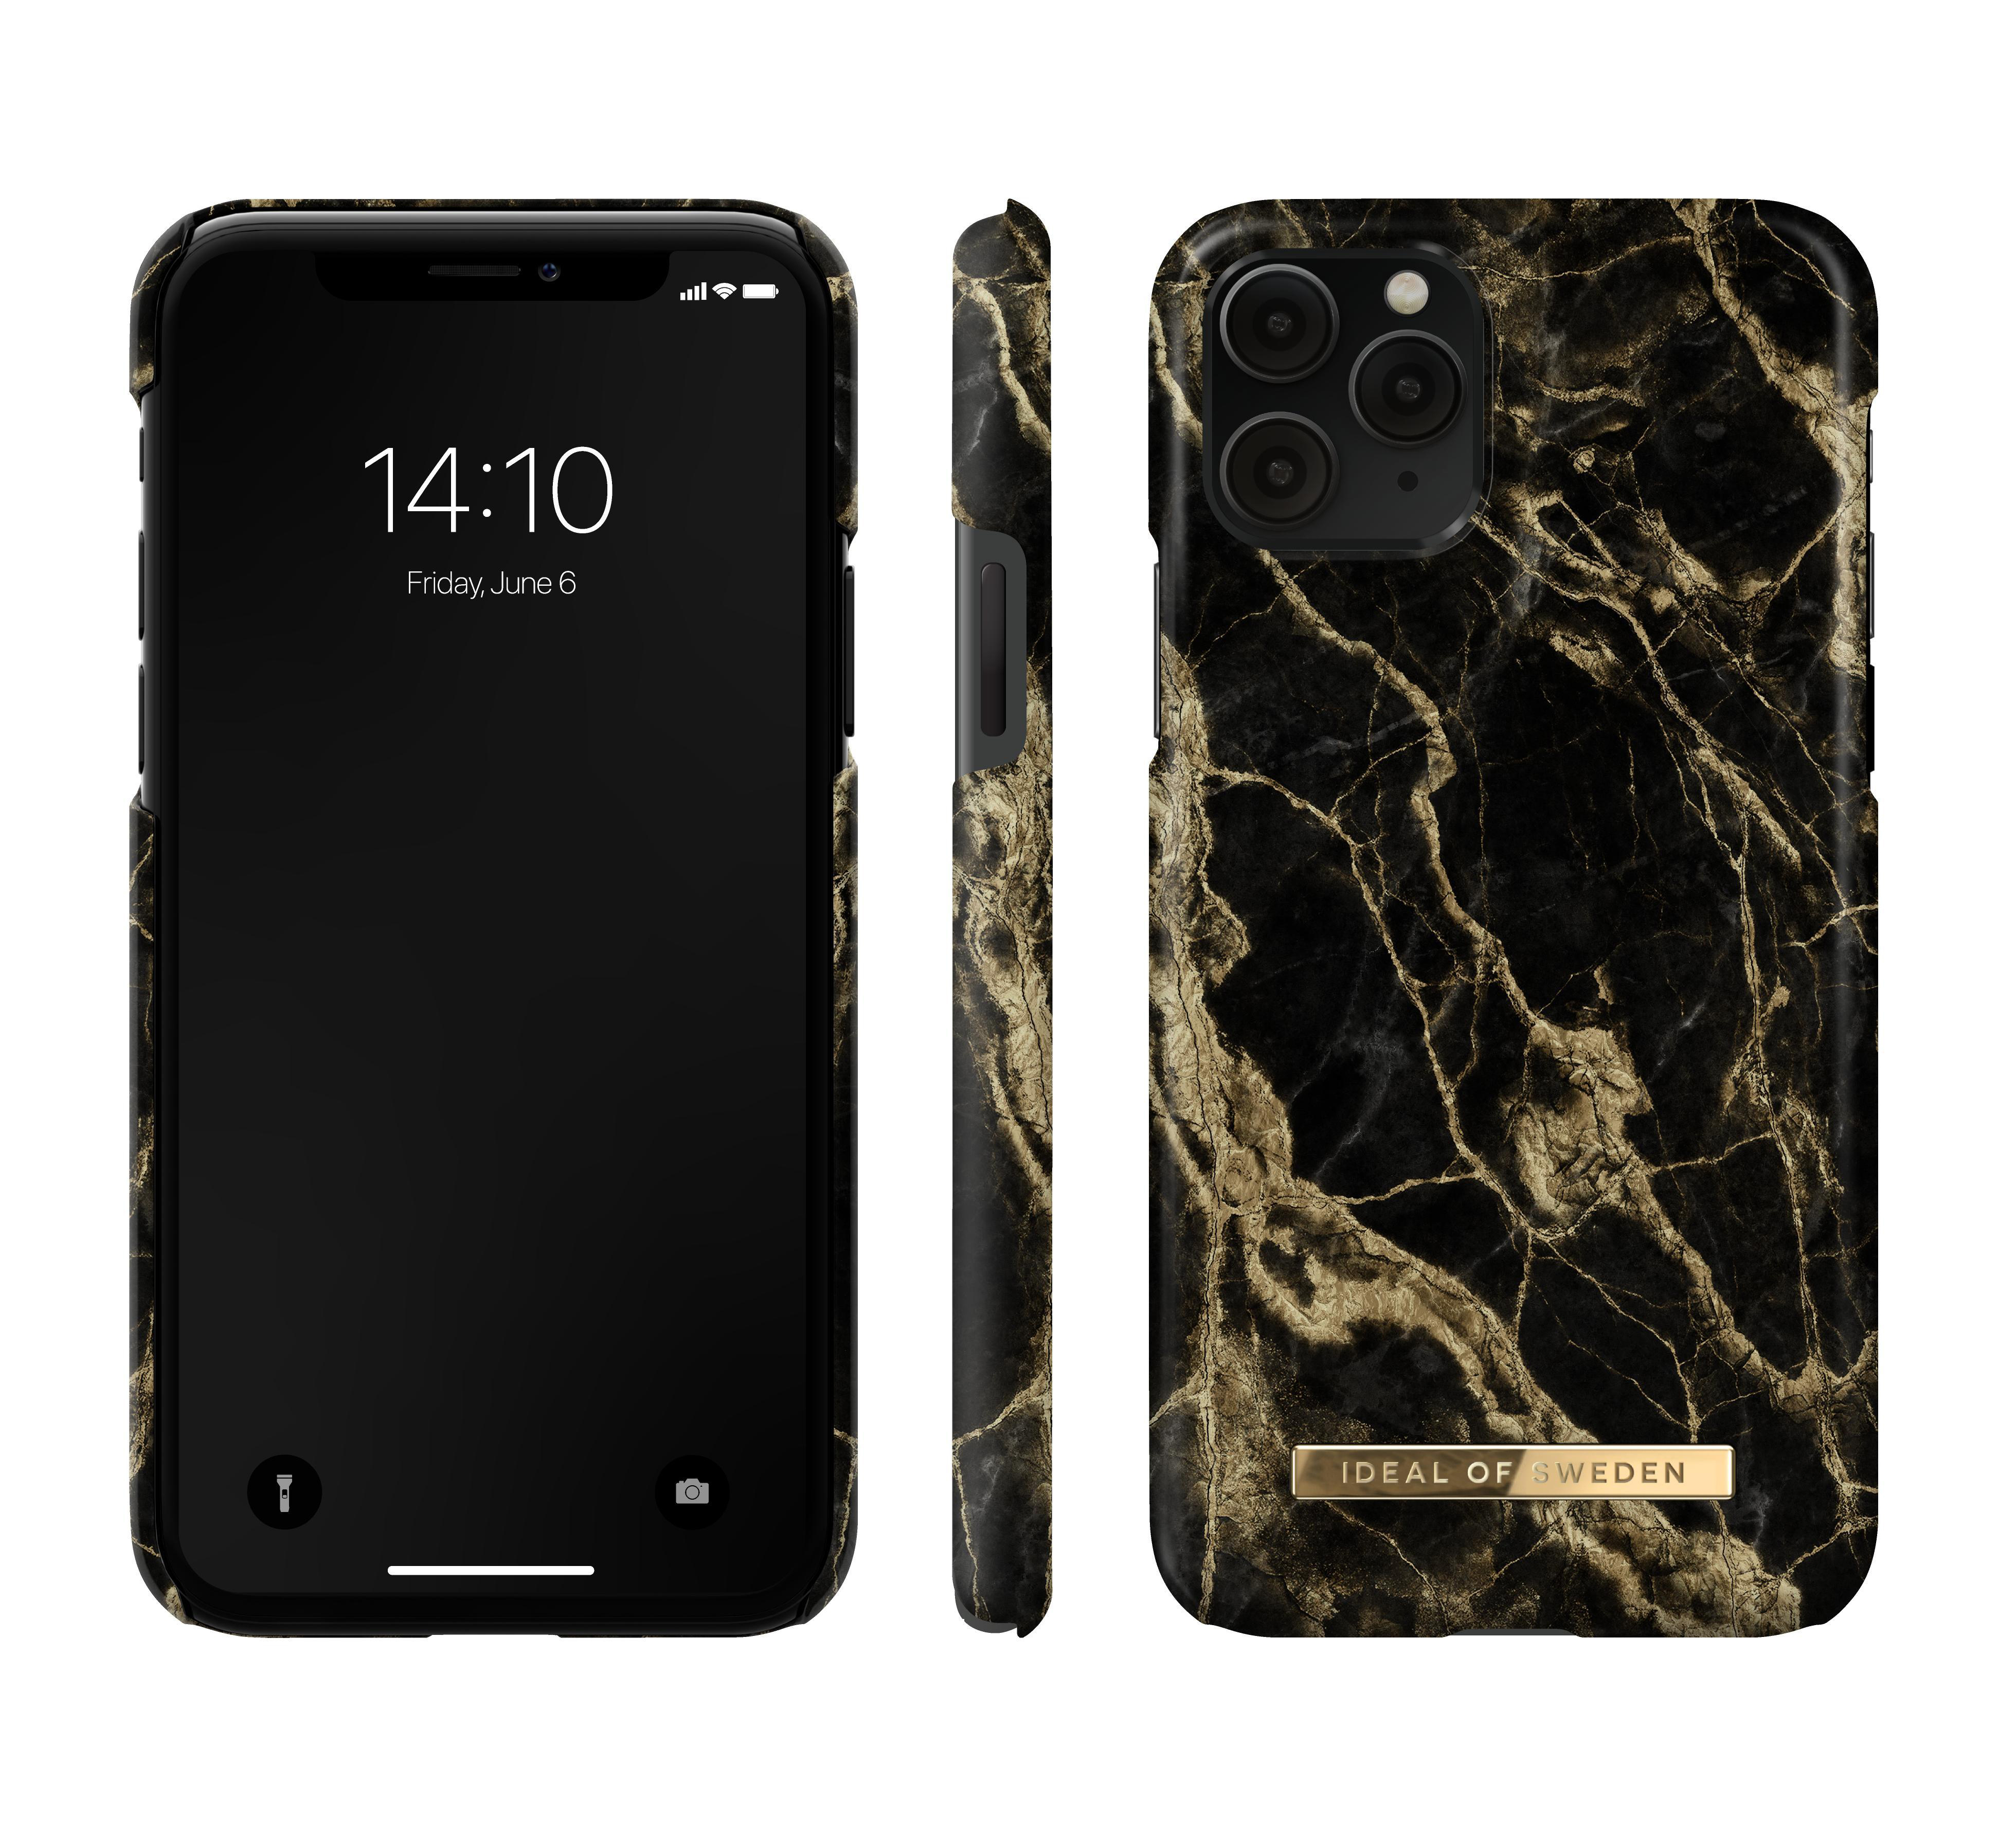 IDEAL OF SWEDEN iPhone iPhone iPhone XS, Pro, X, Backcover, Fashion, Apple, Black 11